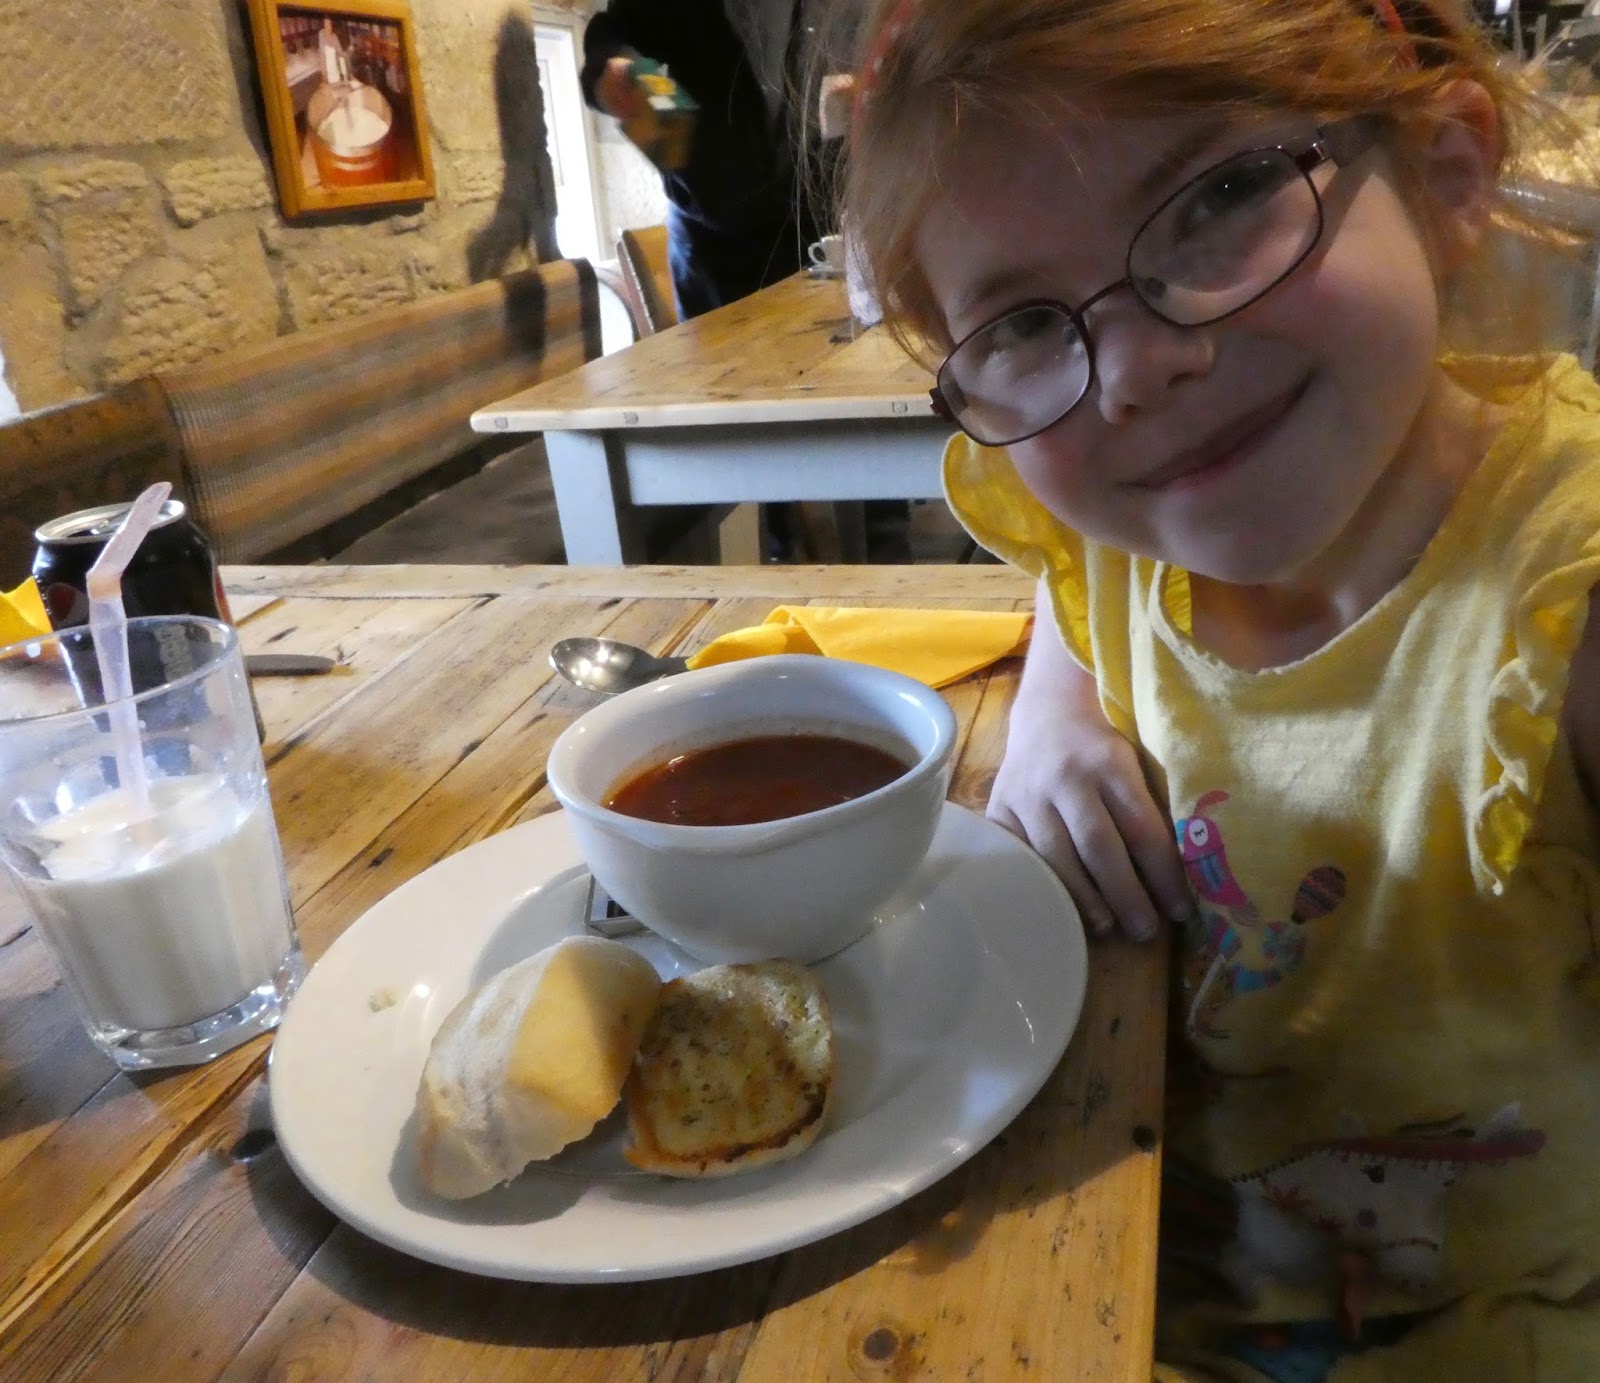 Northumberland Cheese Dairy Tour With Kids - A Review